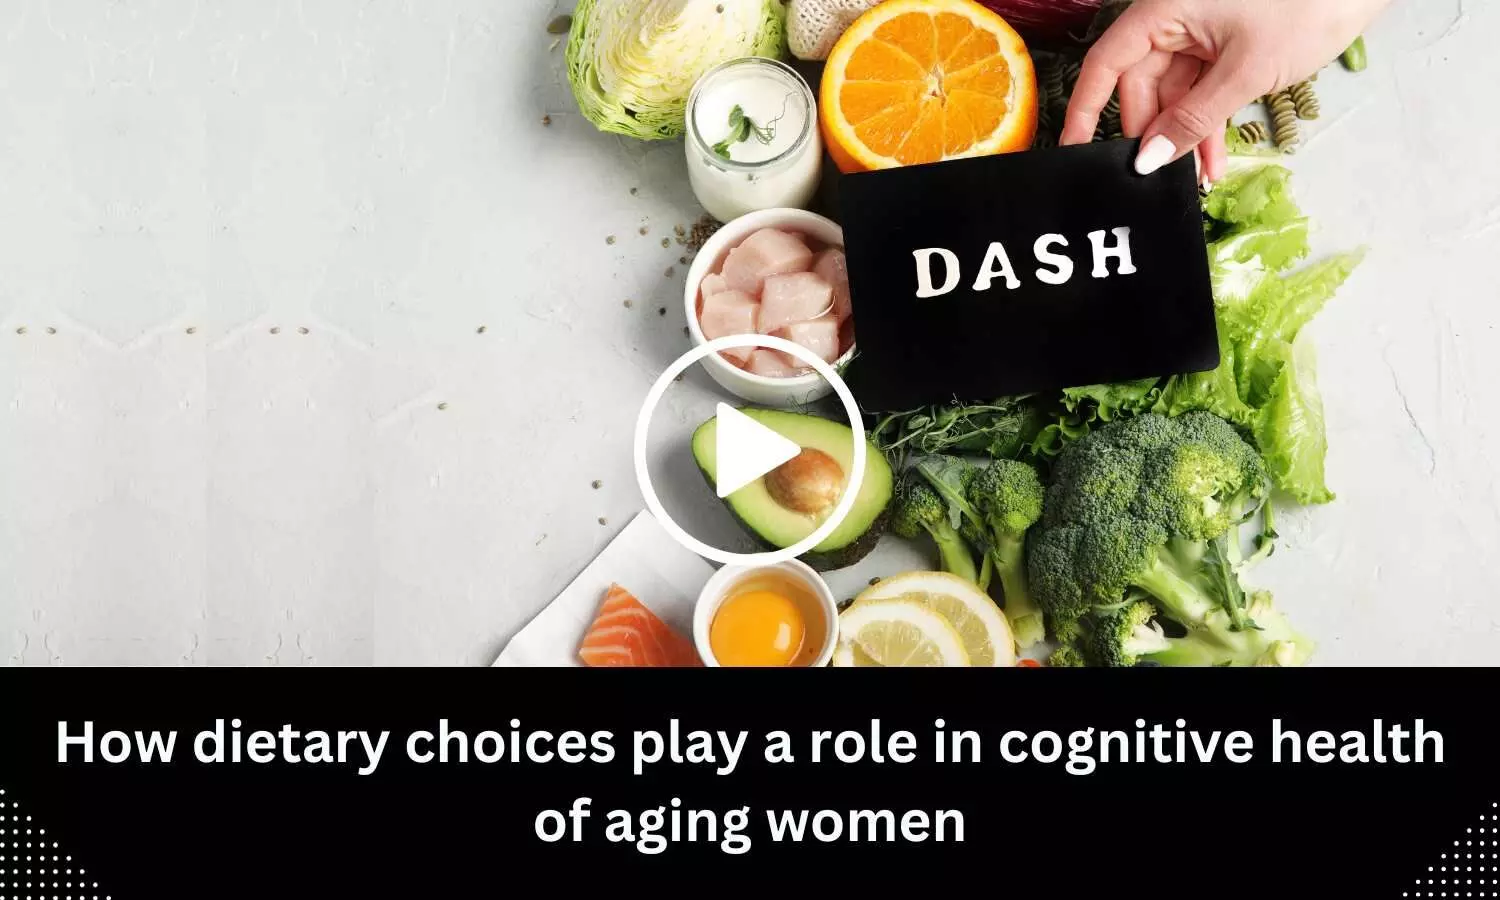 How dietary choices play a role in cognitive health of aging women